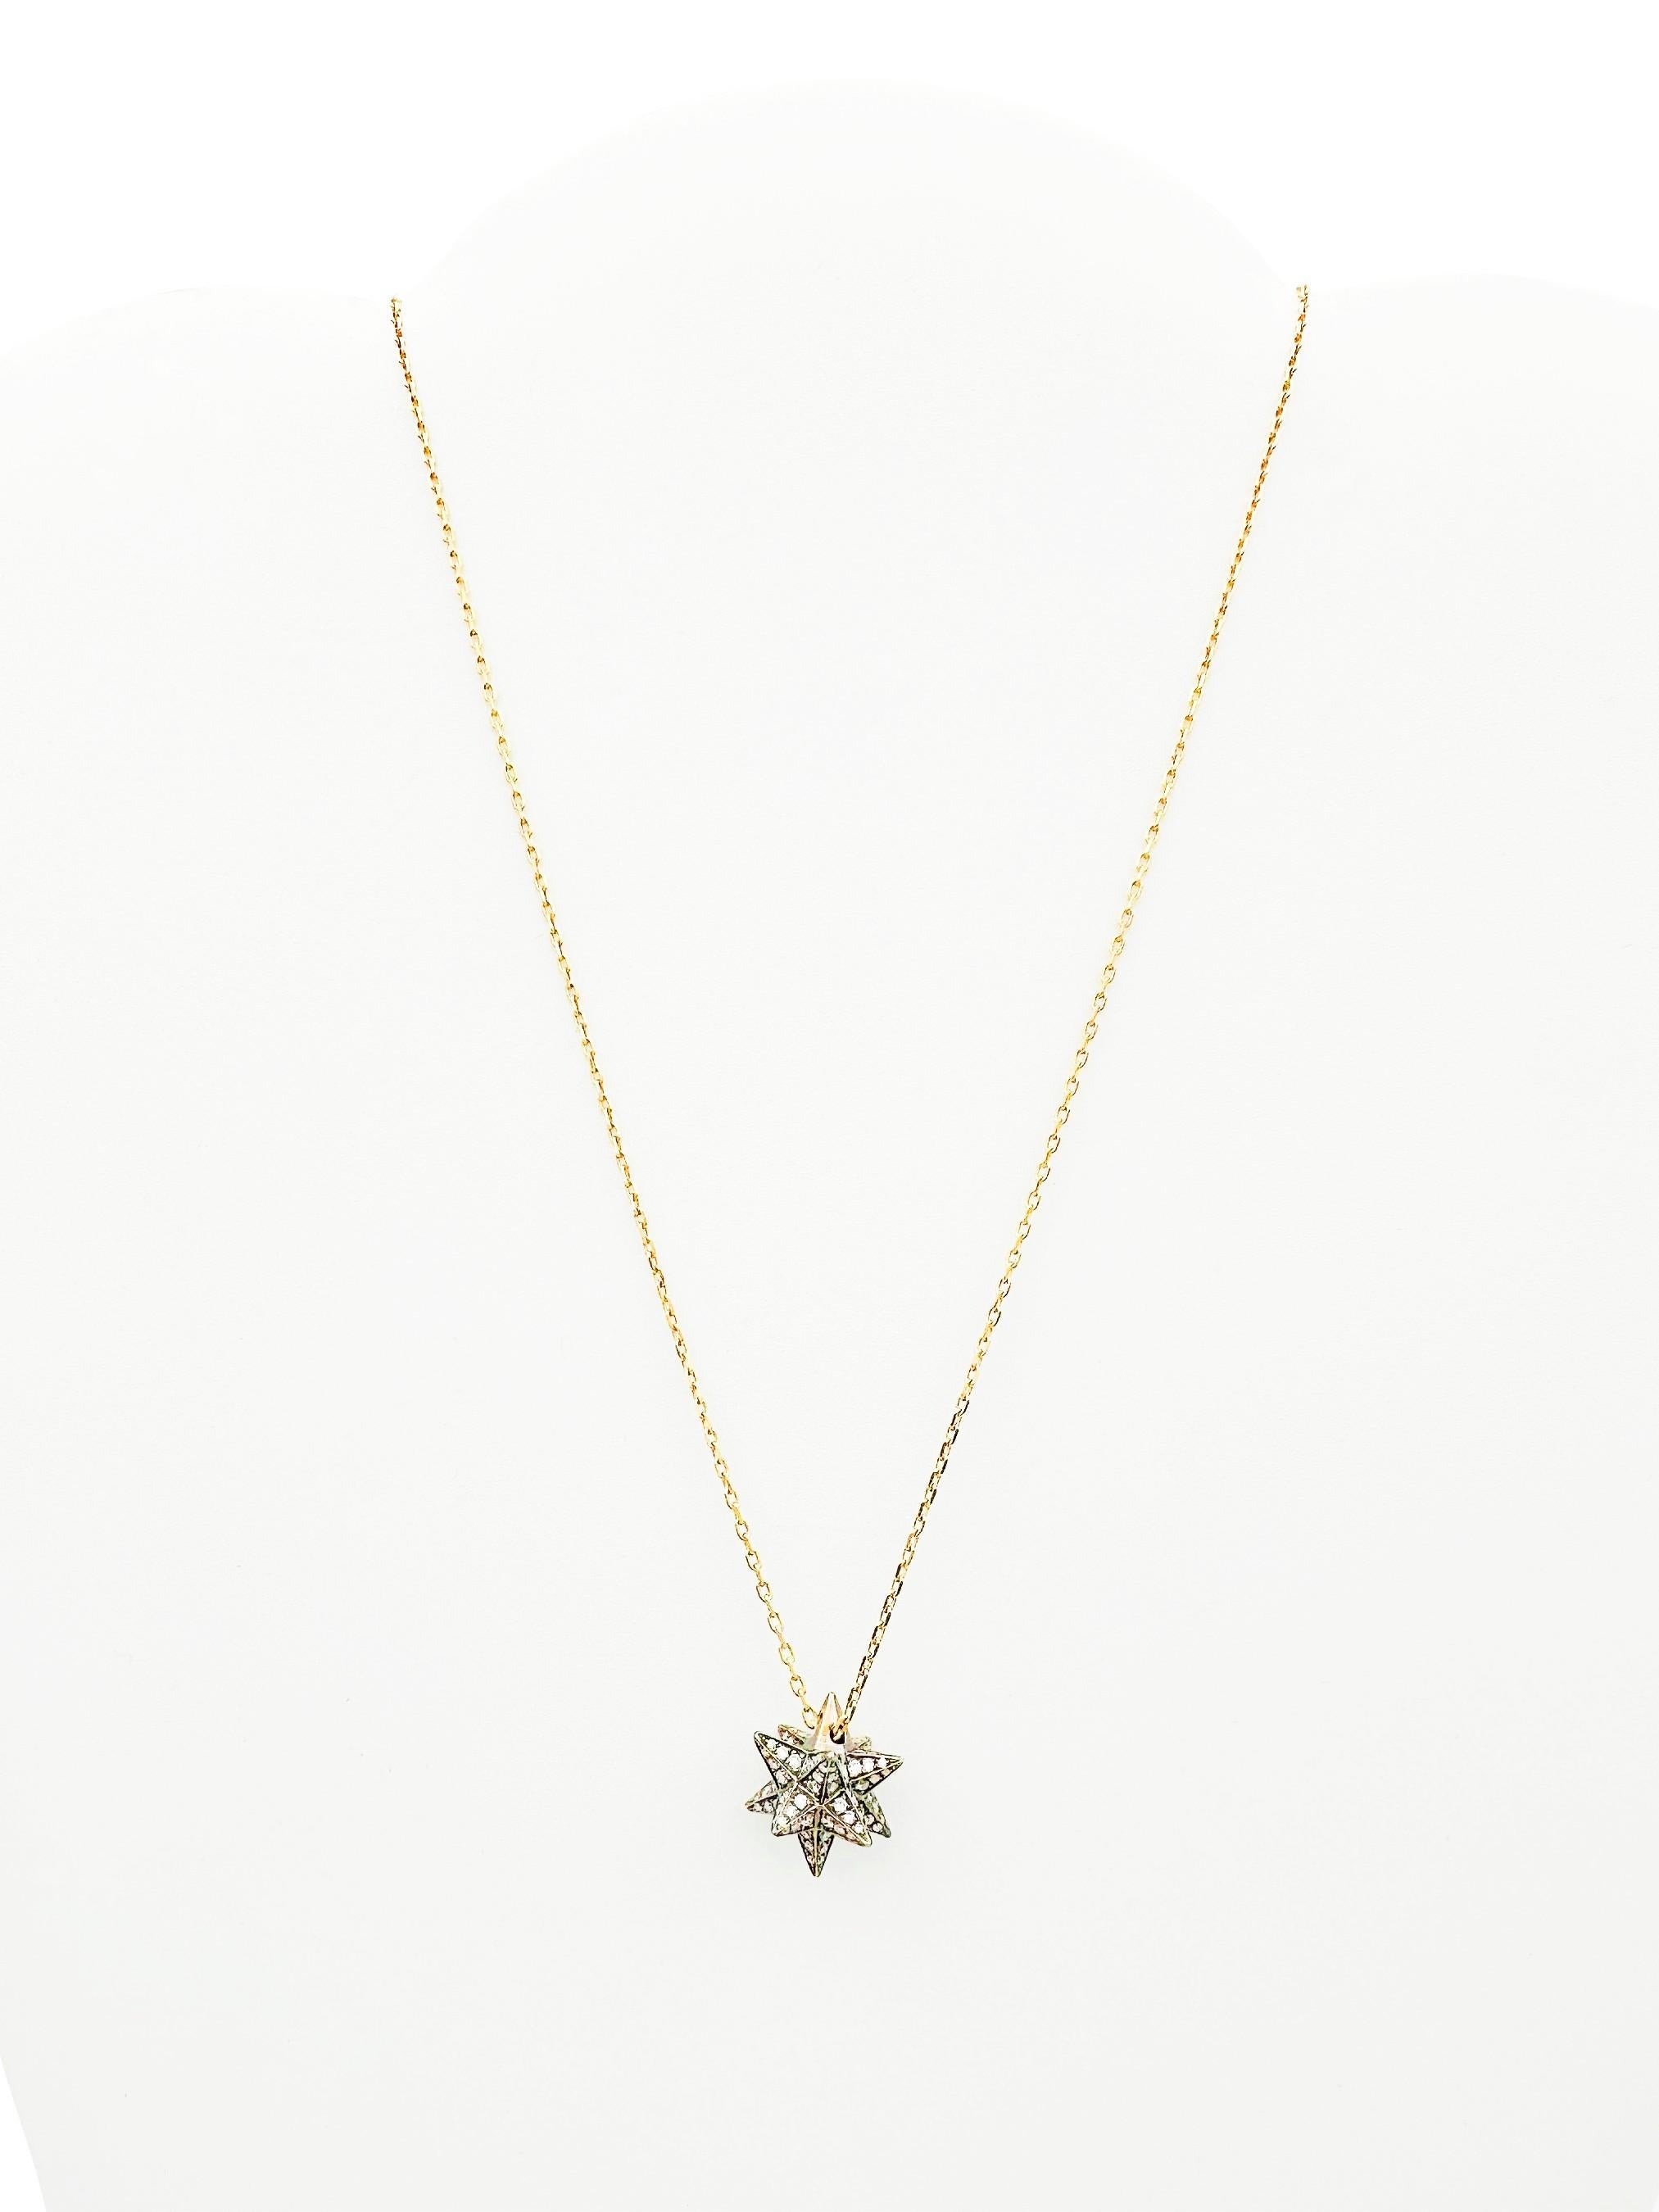 Noor Fares 0.73cttw Diamond 18K Gold Merkaba Star Pendant Necklace In Excellent Condition For Sale In North Attleboro, MA